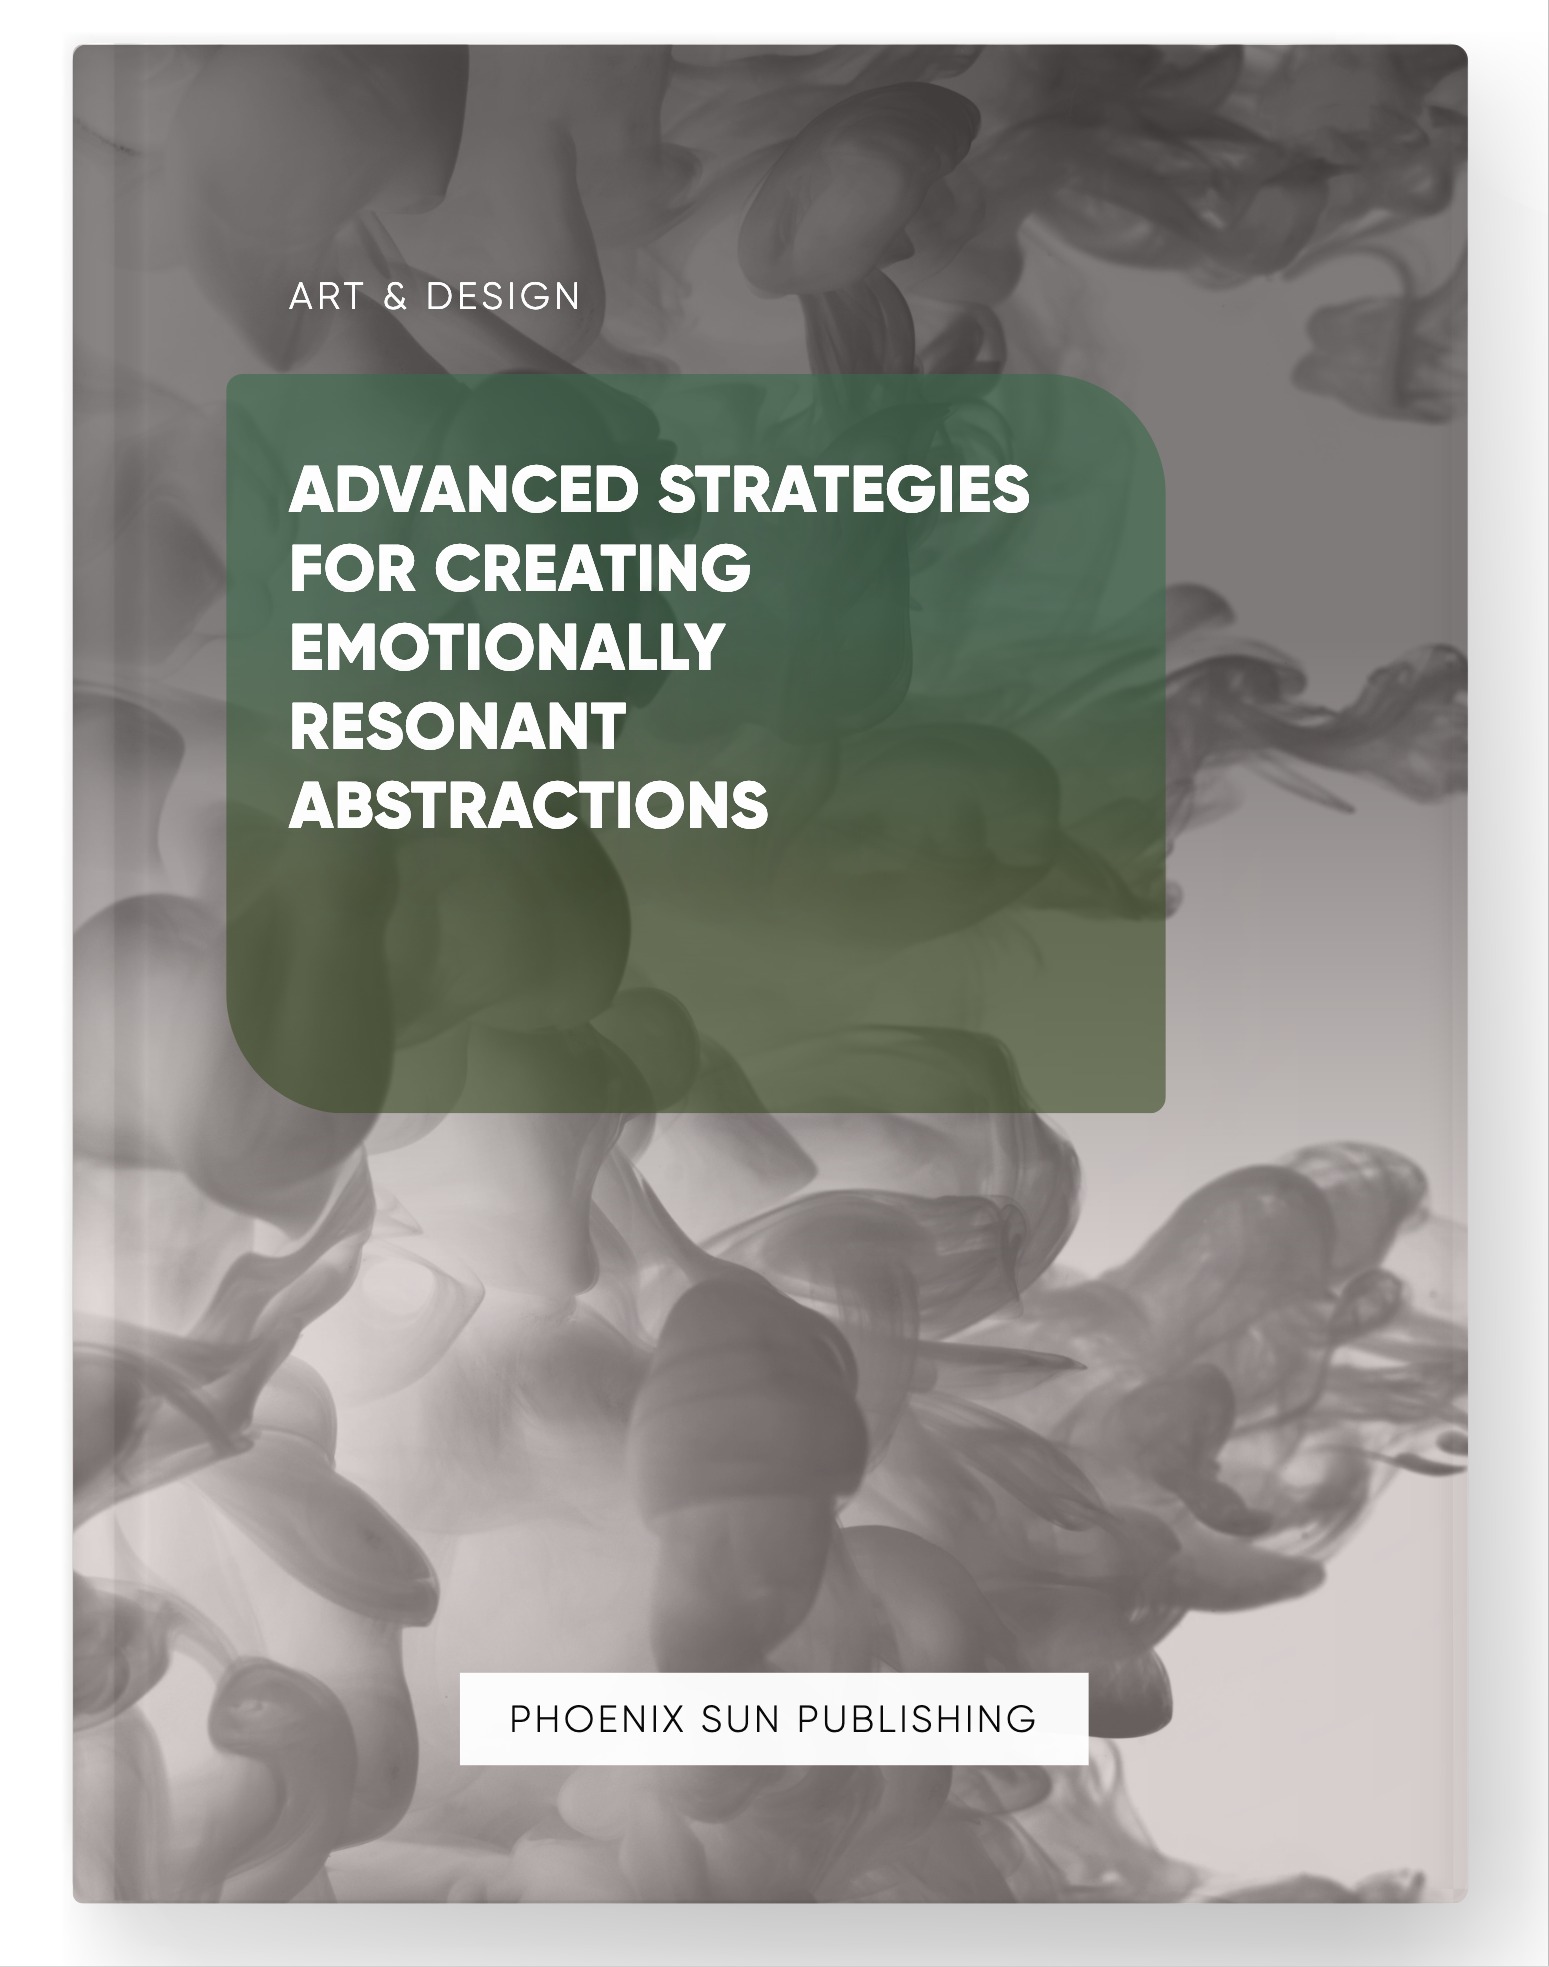 Advanced Strategies for Creating Emotionally Resonant Abstractions